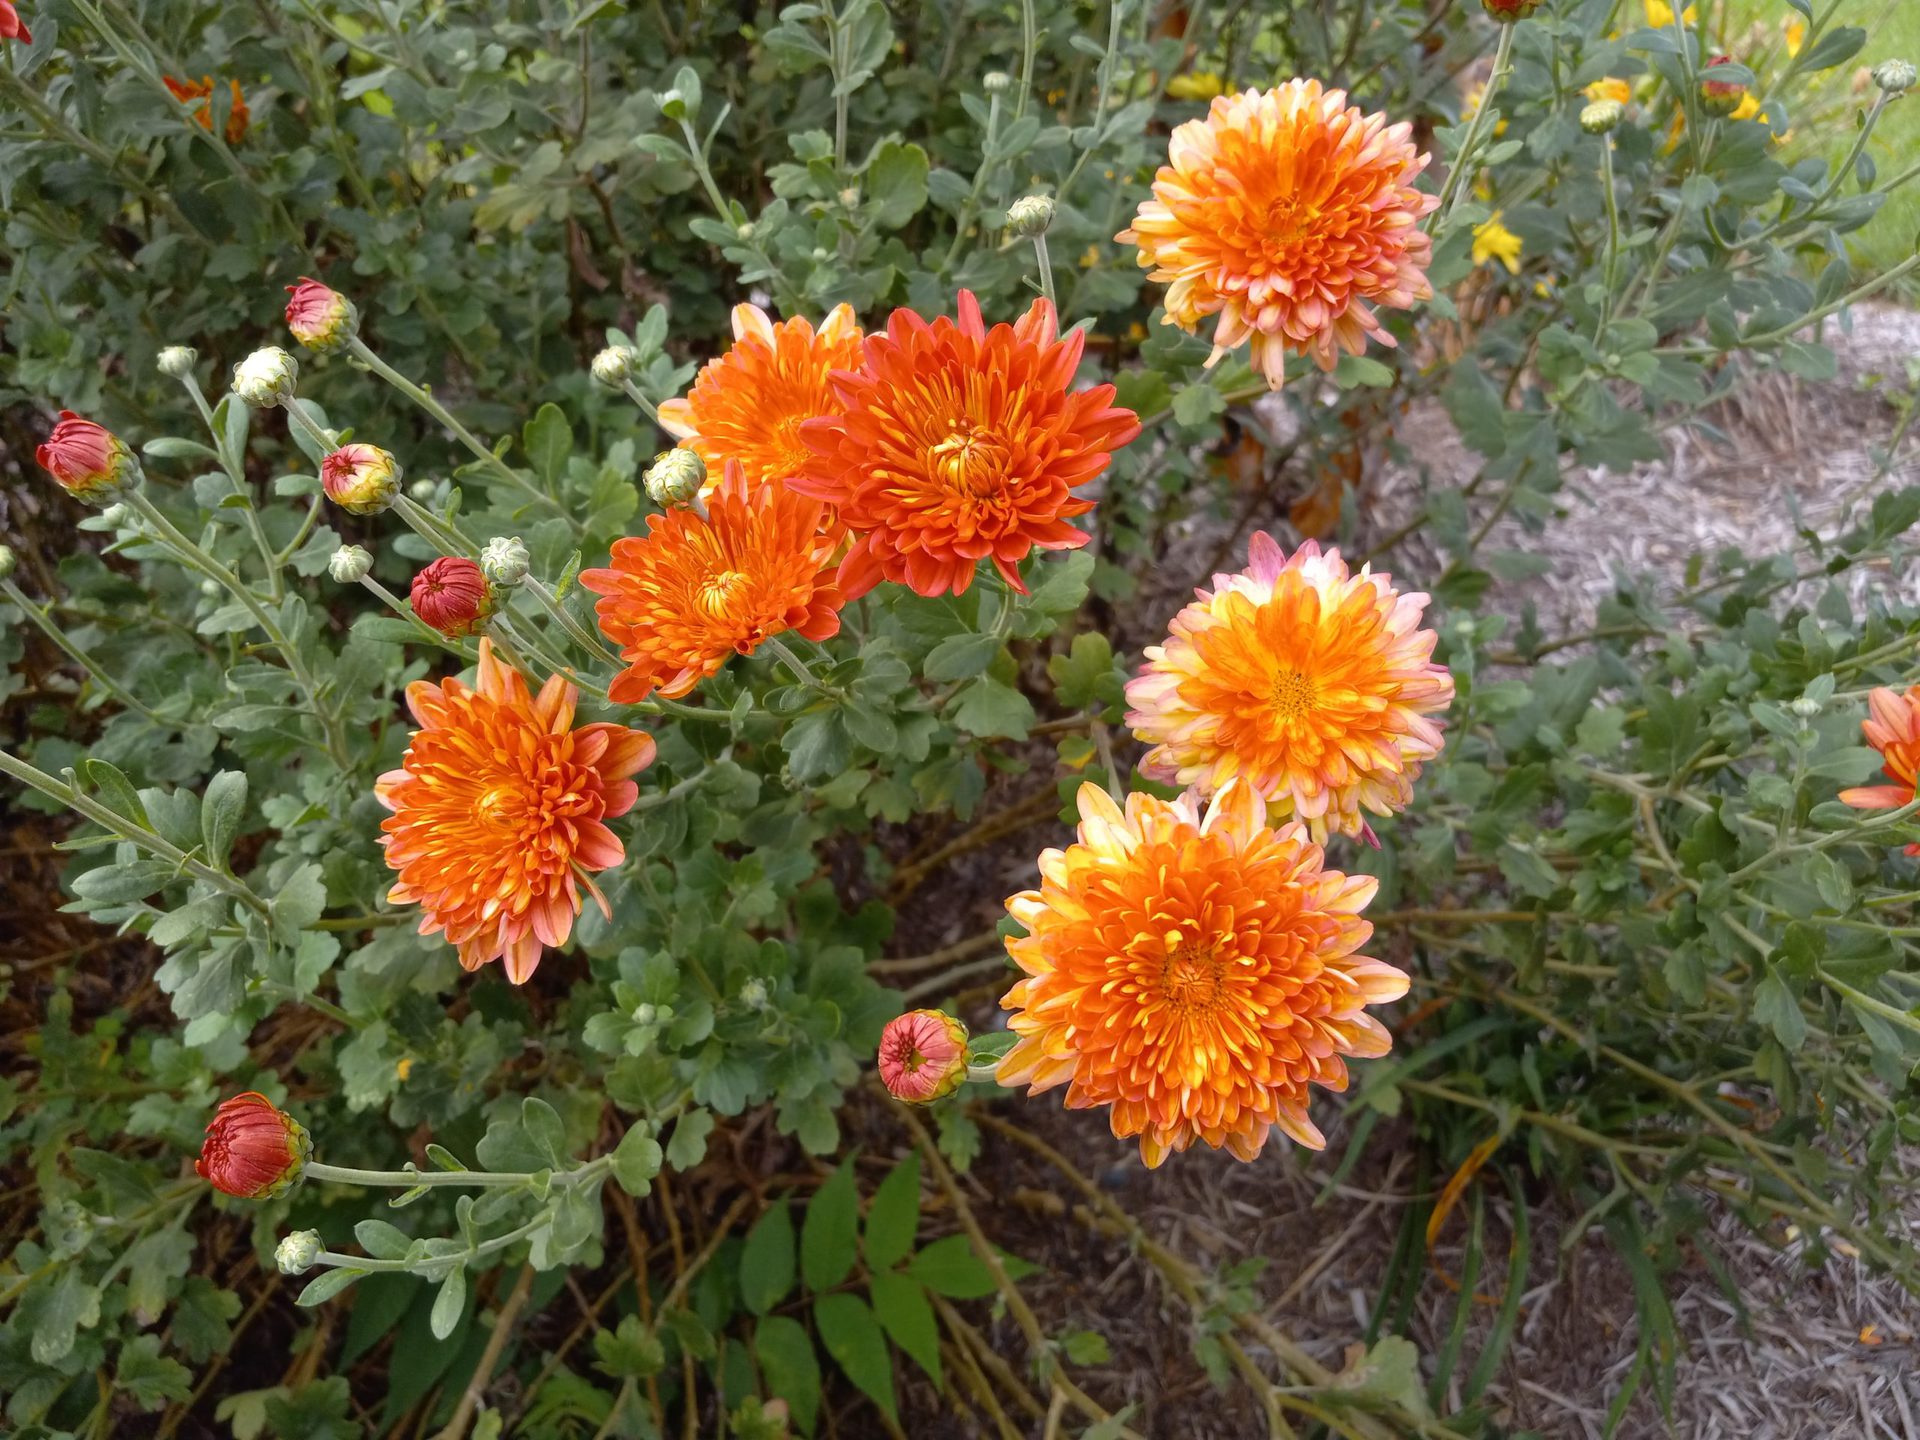 A close up image of orange flowers taken with the Samsung Galaxy A12